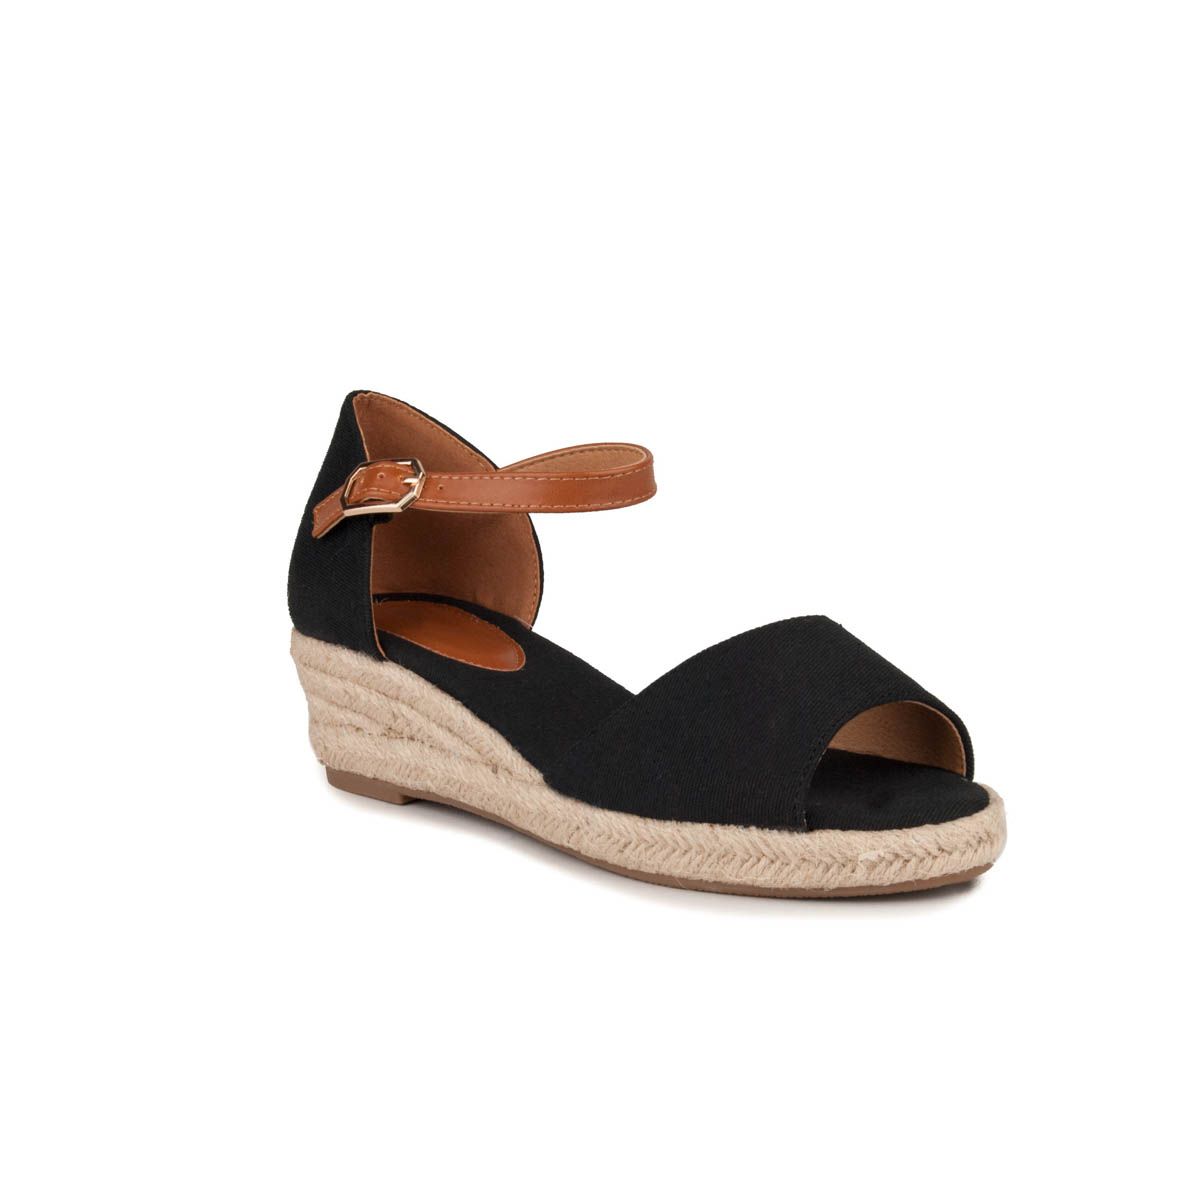 The esparto is fashionable and can not miss some espadrilles this season in your closet. Manufactured in natural materials with spotto floor and anti-slip rubber patin. The closure is with buckle and elastic to adjust perfectly. The buttress is reinforced and the tone of the sandal. The height of the wedge is 4.5 cm.